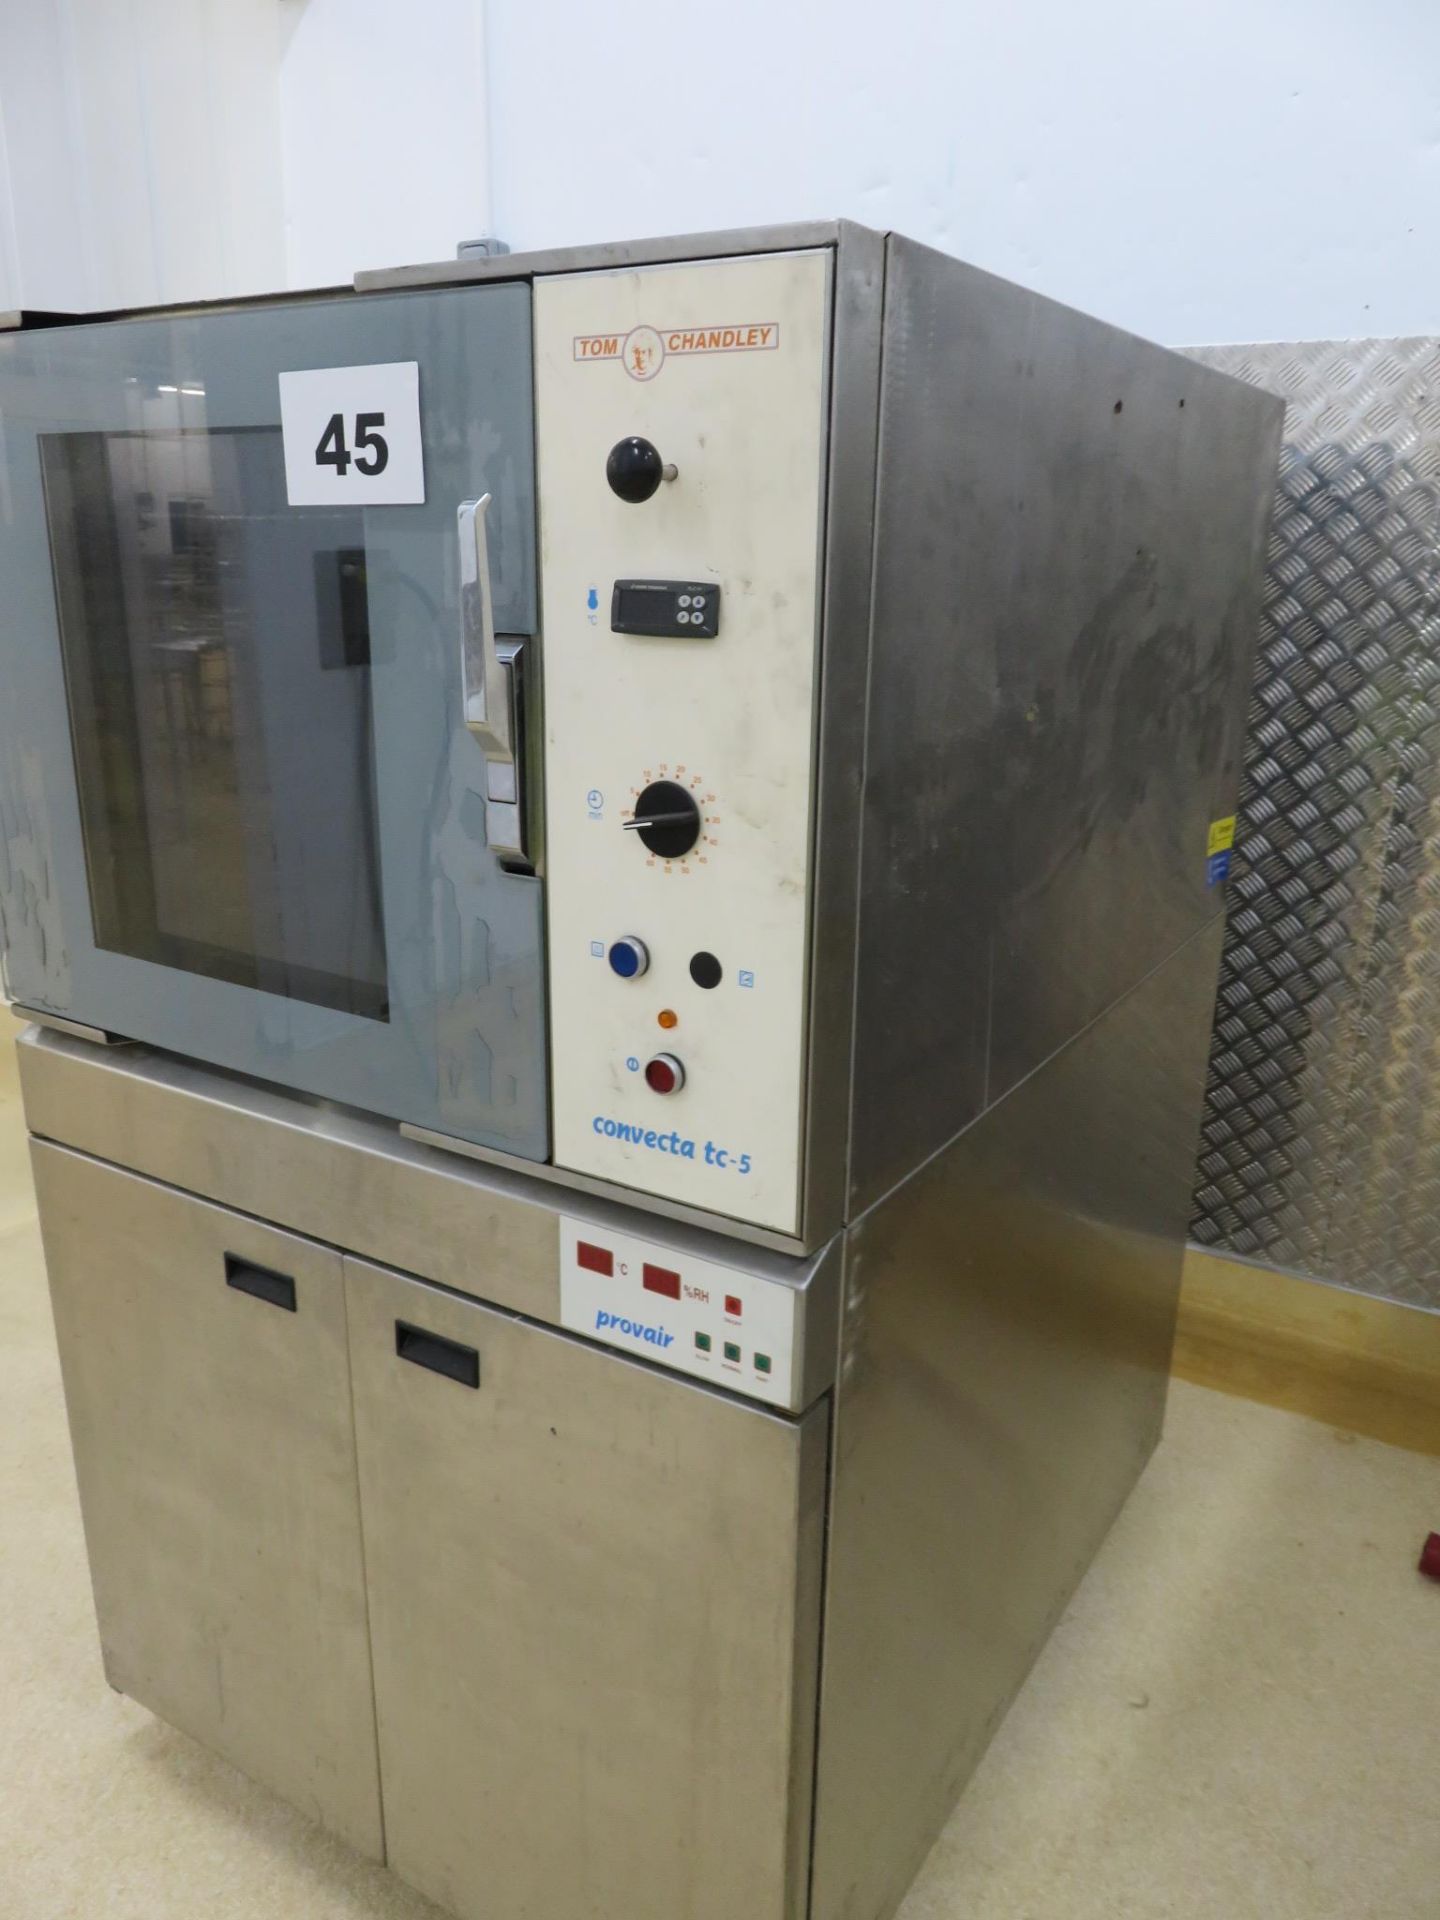 TOM CHANDLEY CONVECTA TC-5 OVEN. - Image 3 of 4